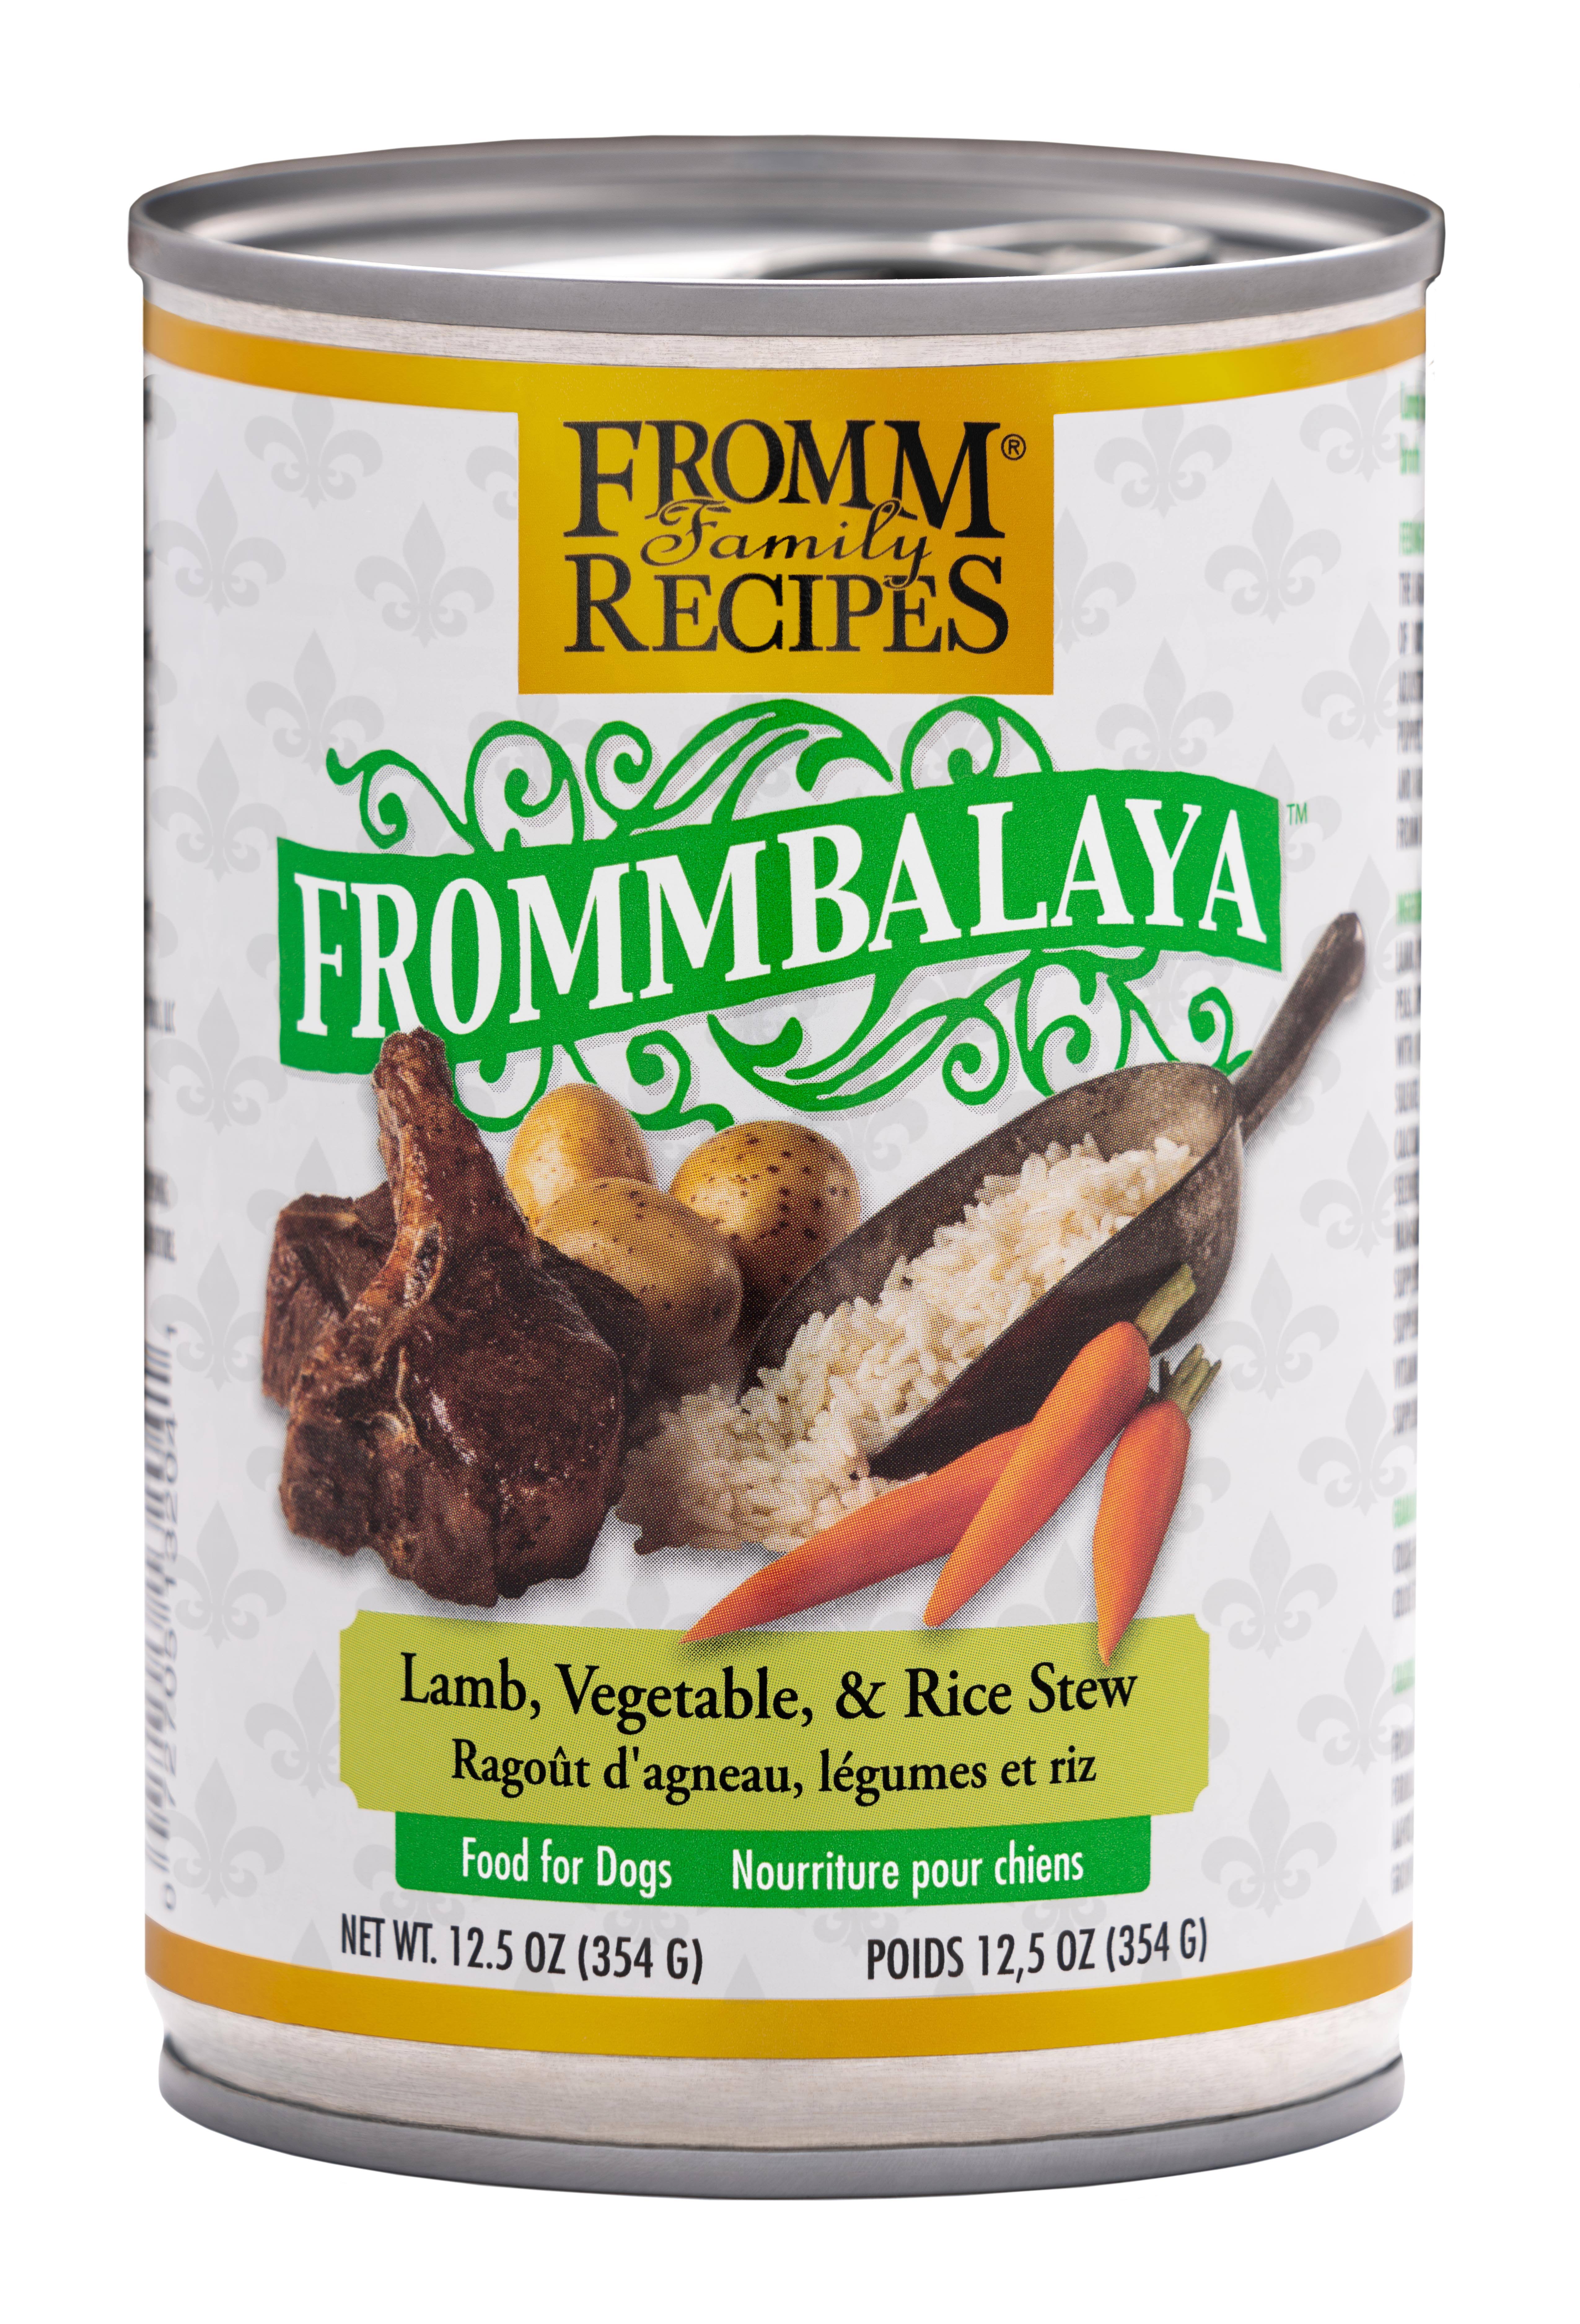 Fromm Frommbalaya Lamb Rice & Vegetable Stew Dog Food 12.5oz